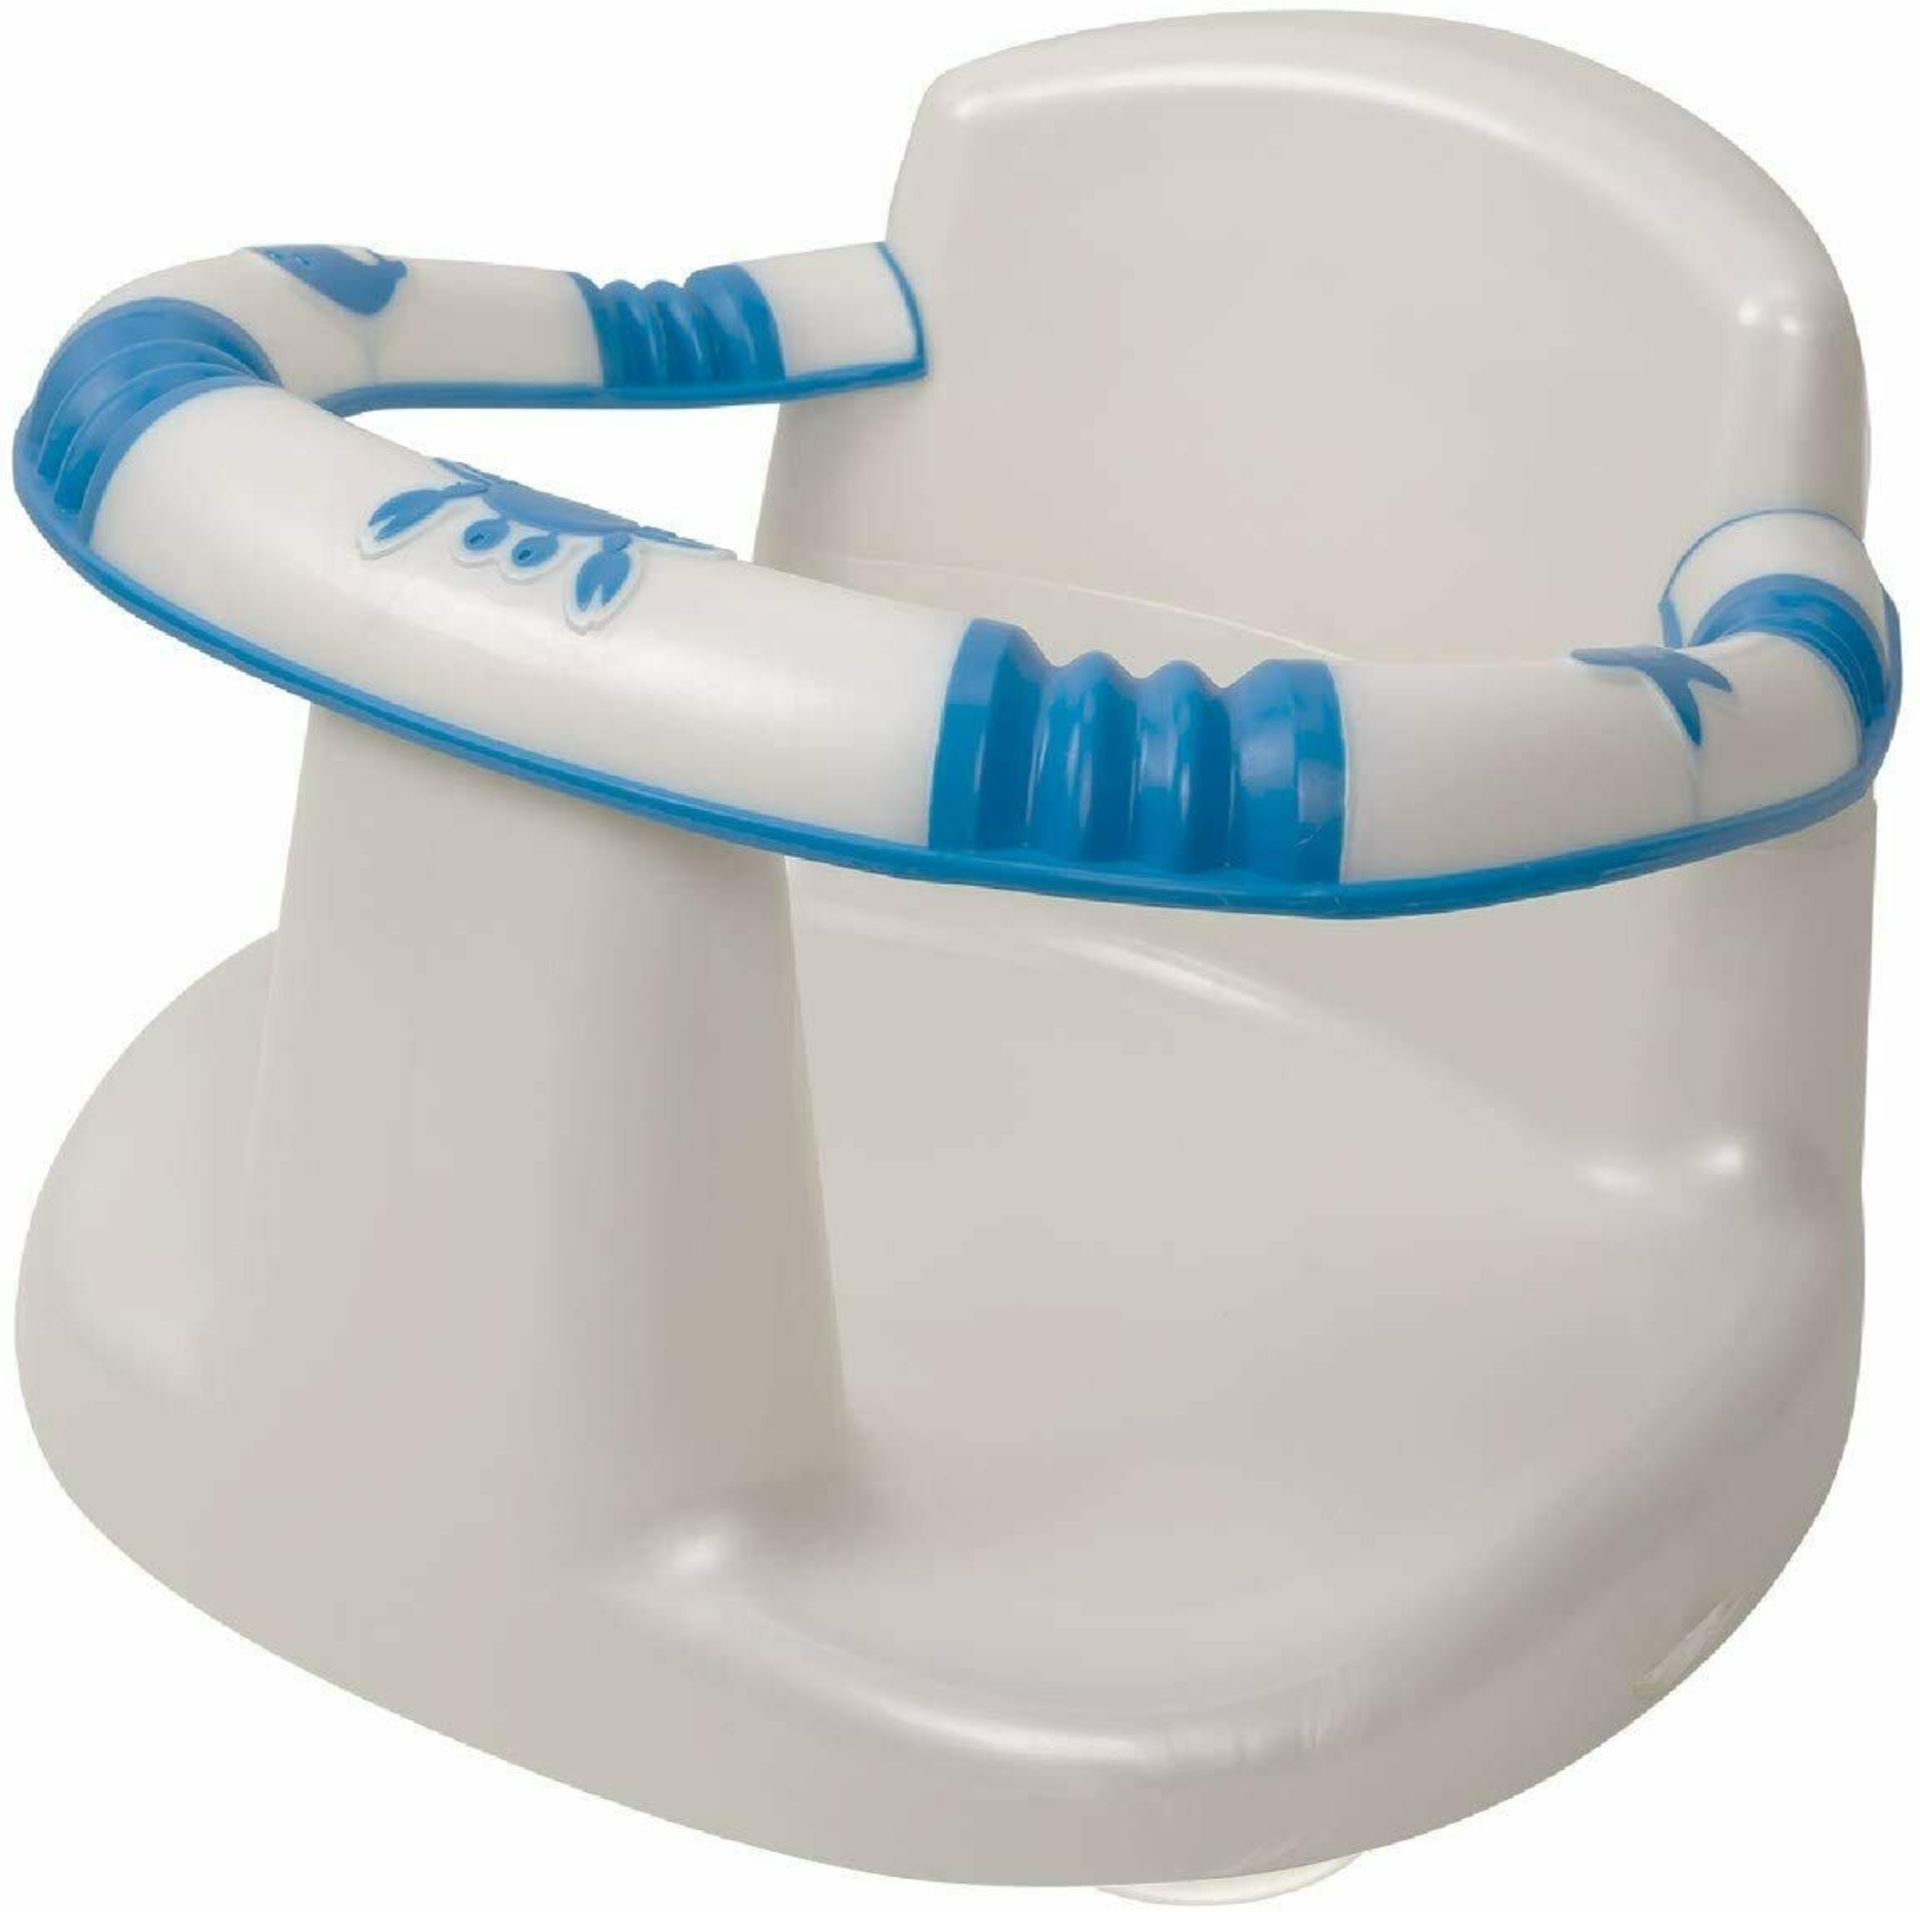 new babyway 6m-12m baby bath support seat 4x suction pad - Image 2 of 3